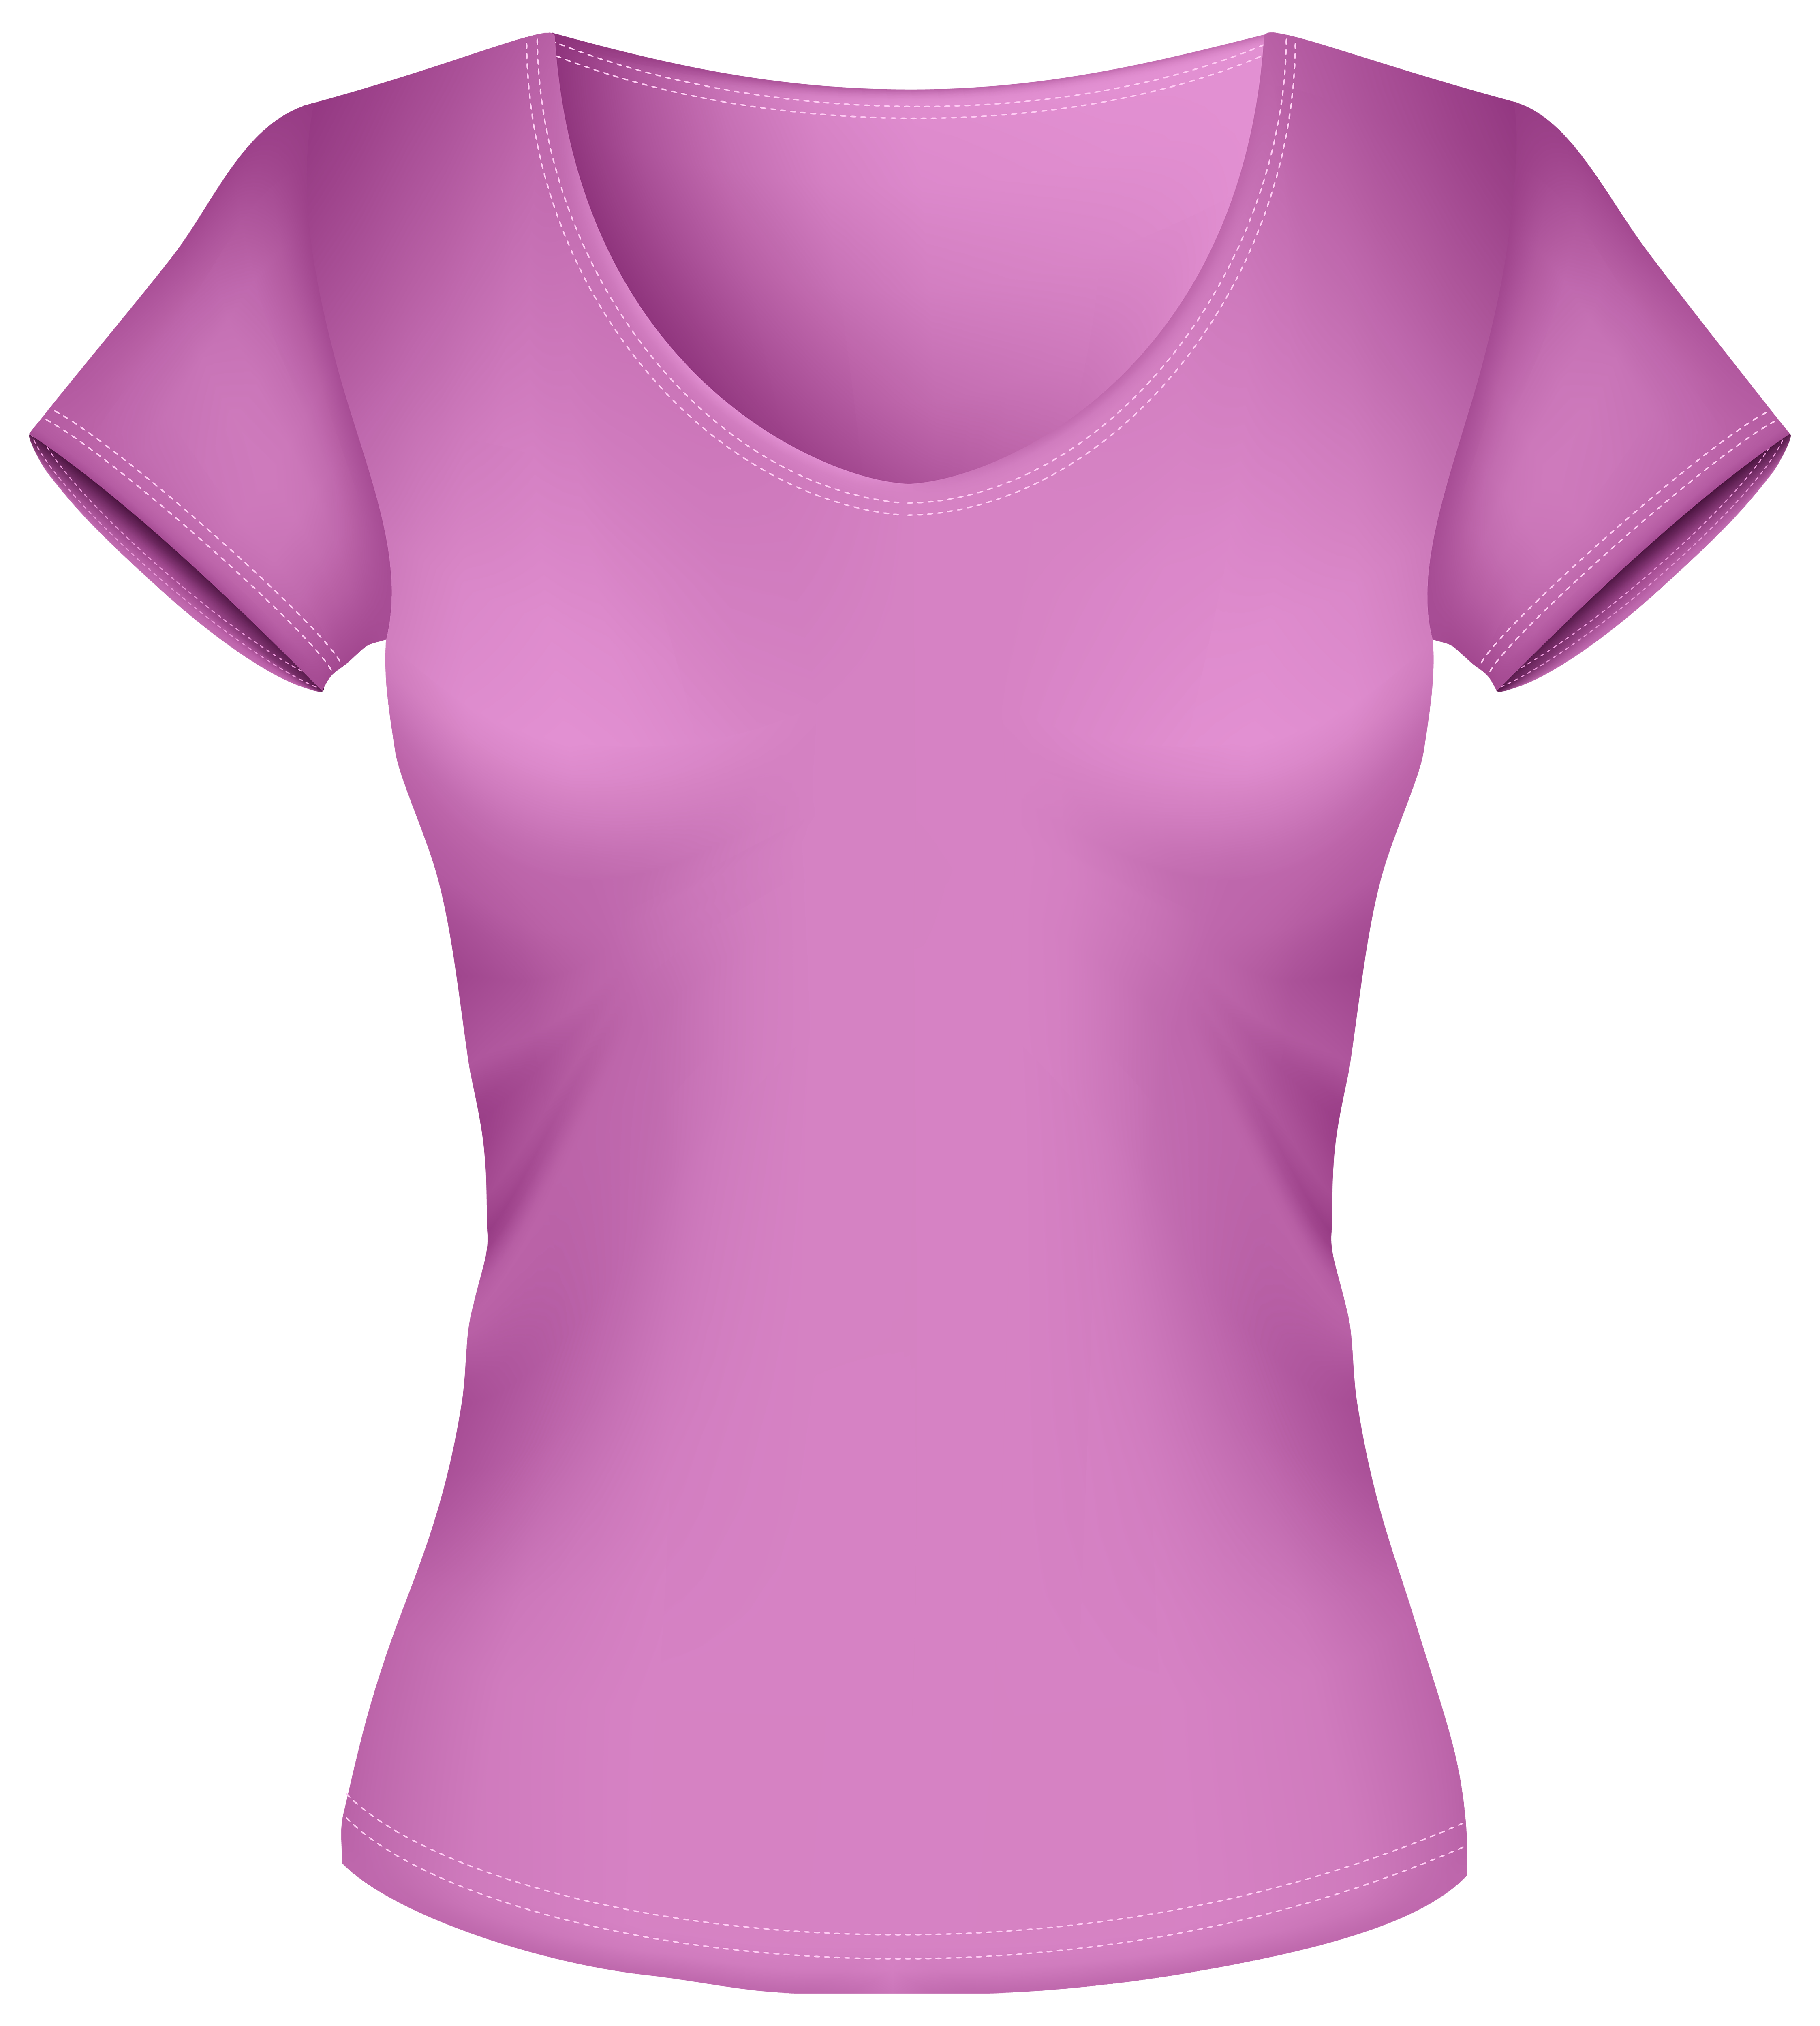 Female Pink Shirt PNG Clipart.